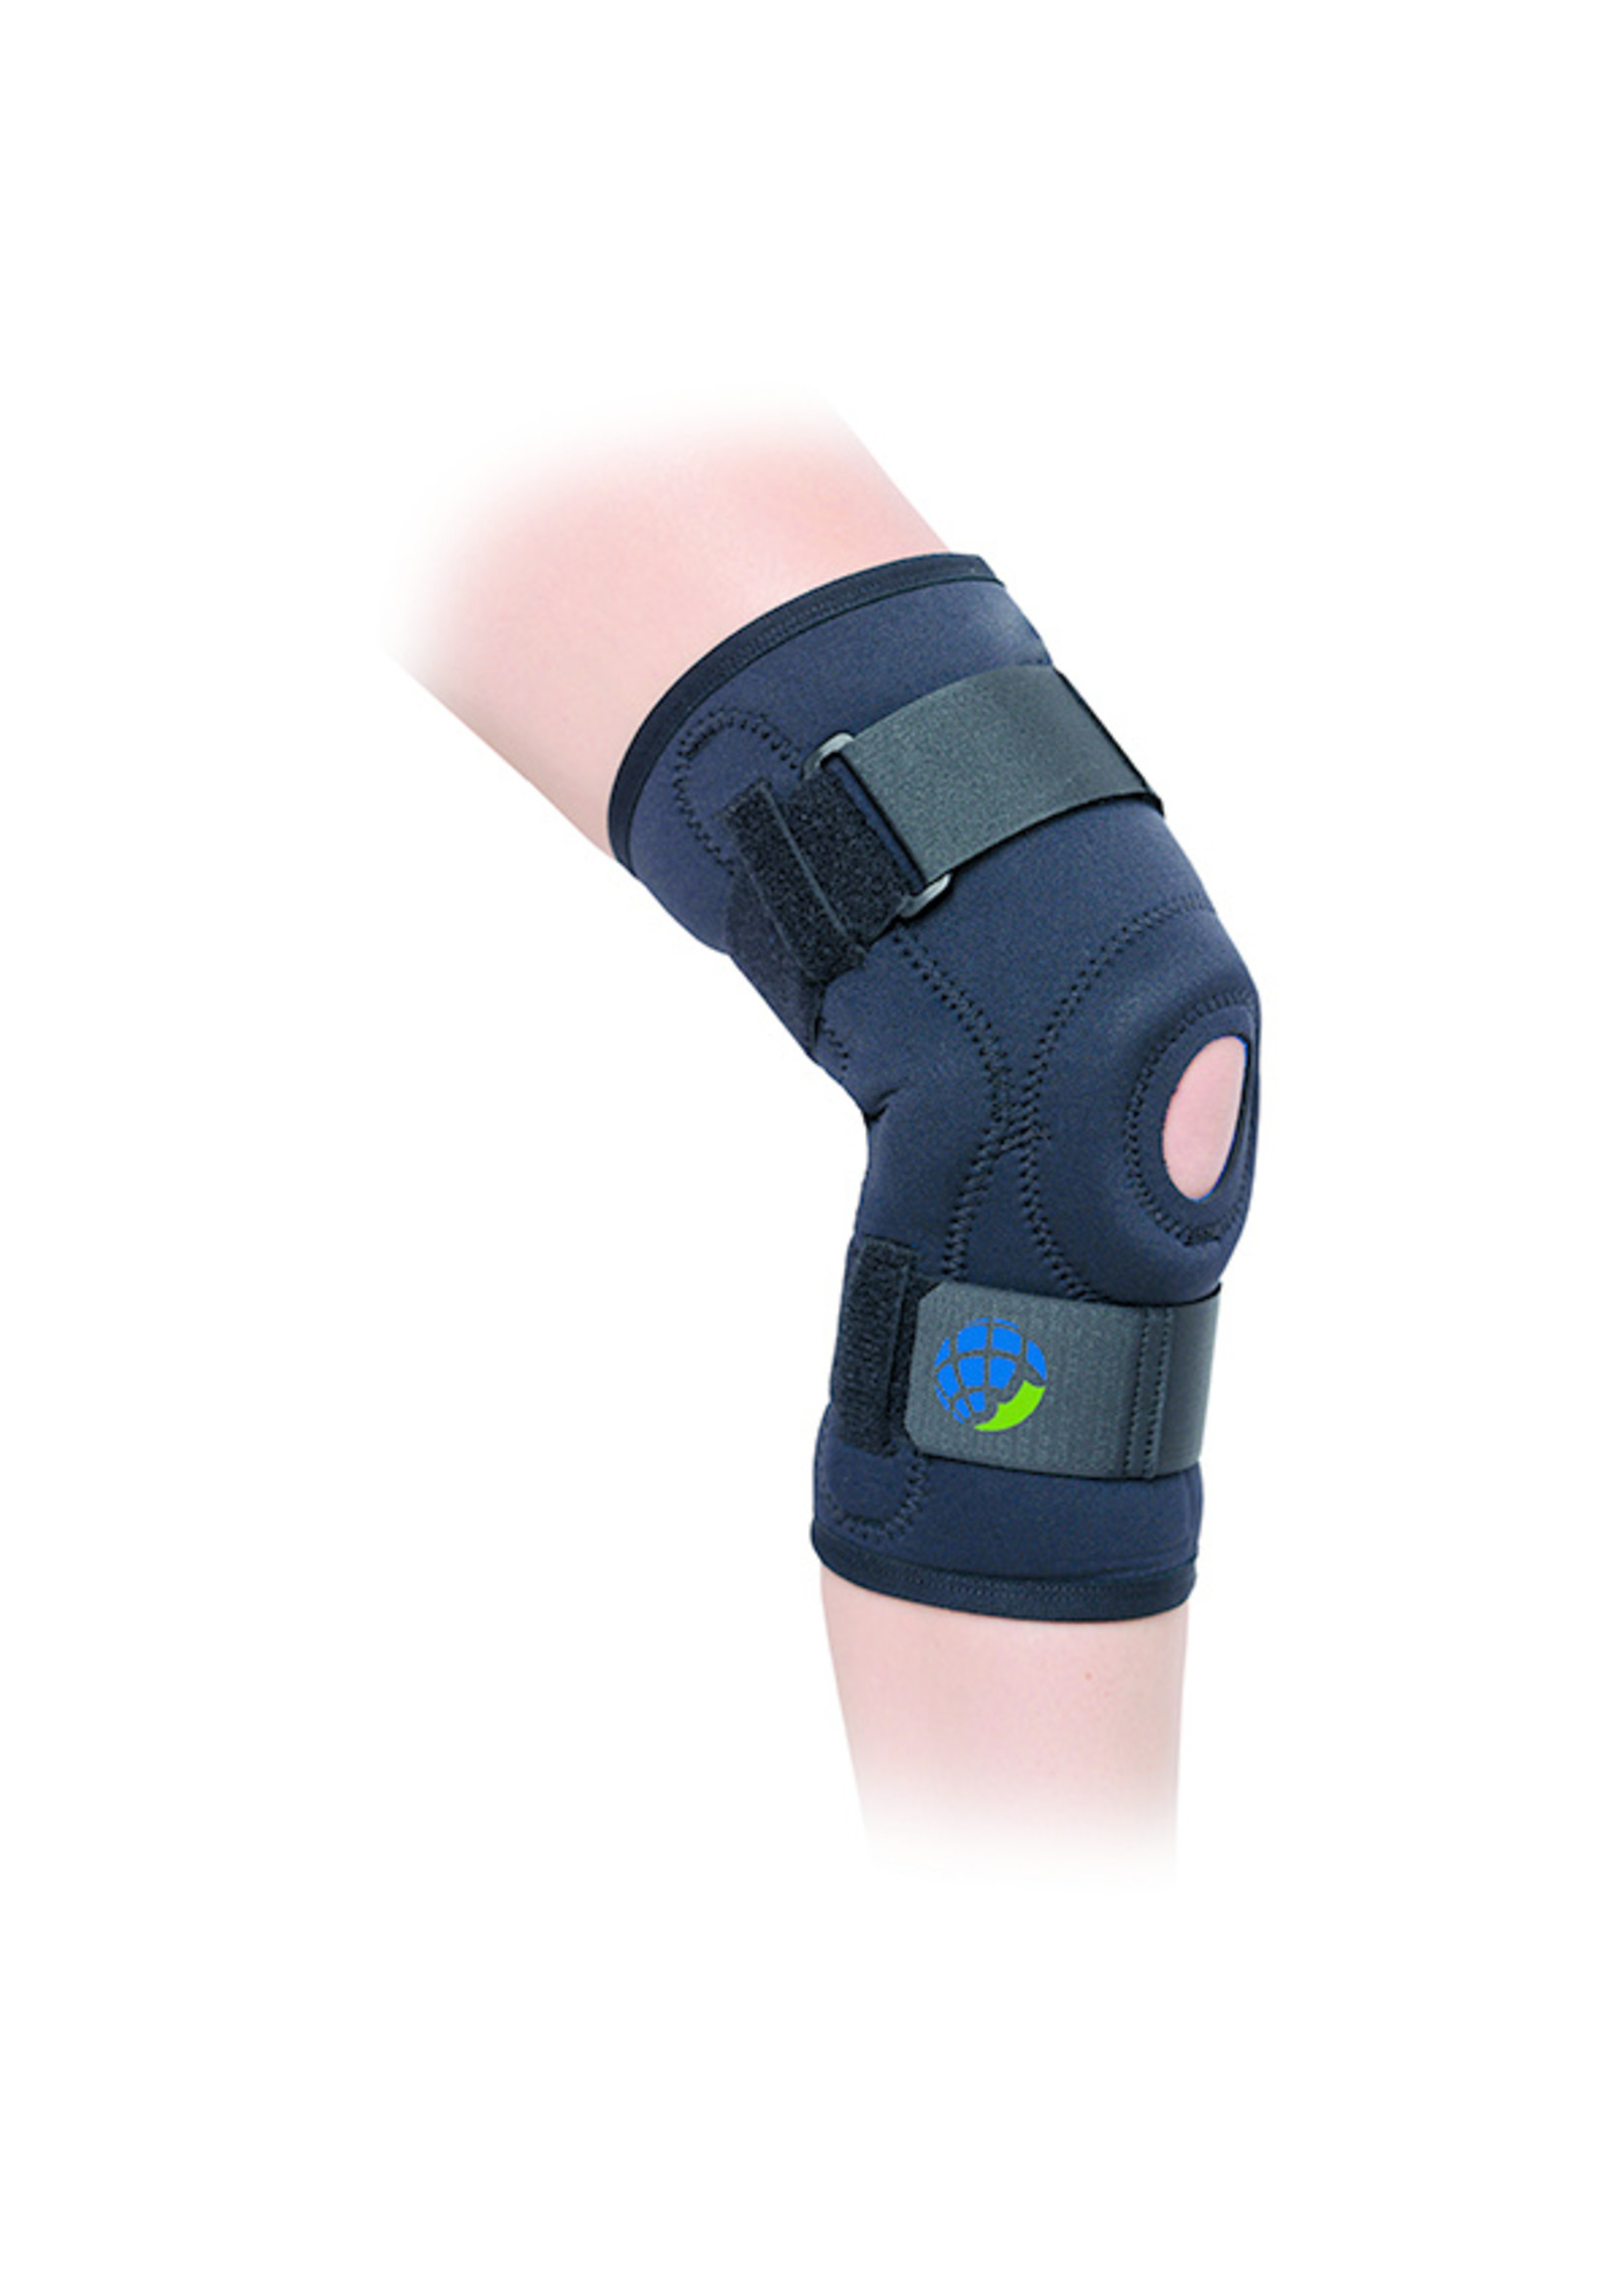 Deluxe Hinged Knee Brace (Large) - Hcpc: L1810 / L1812